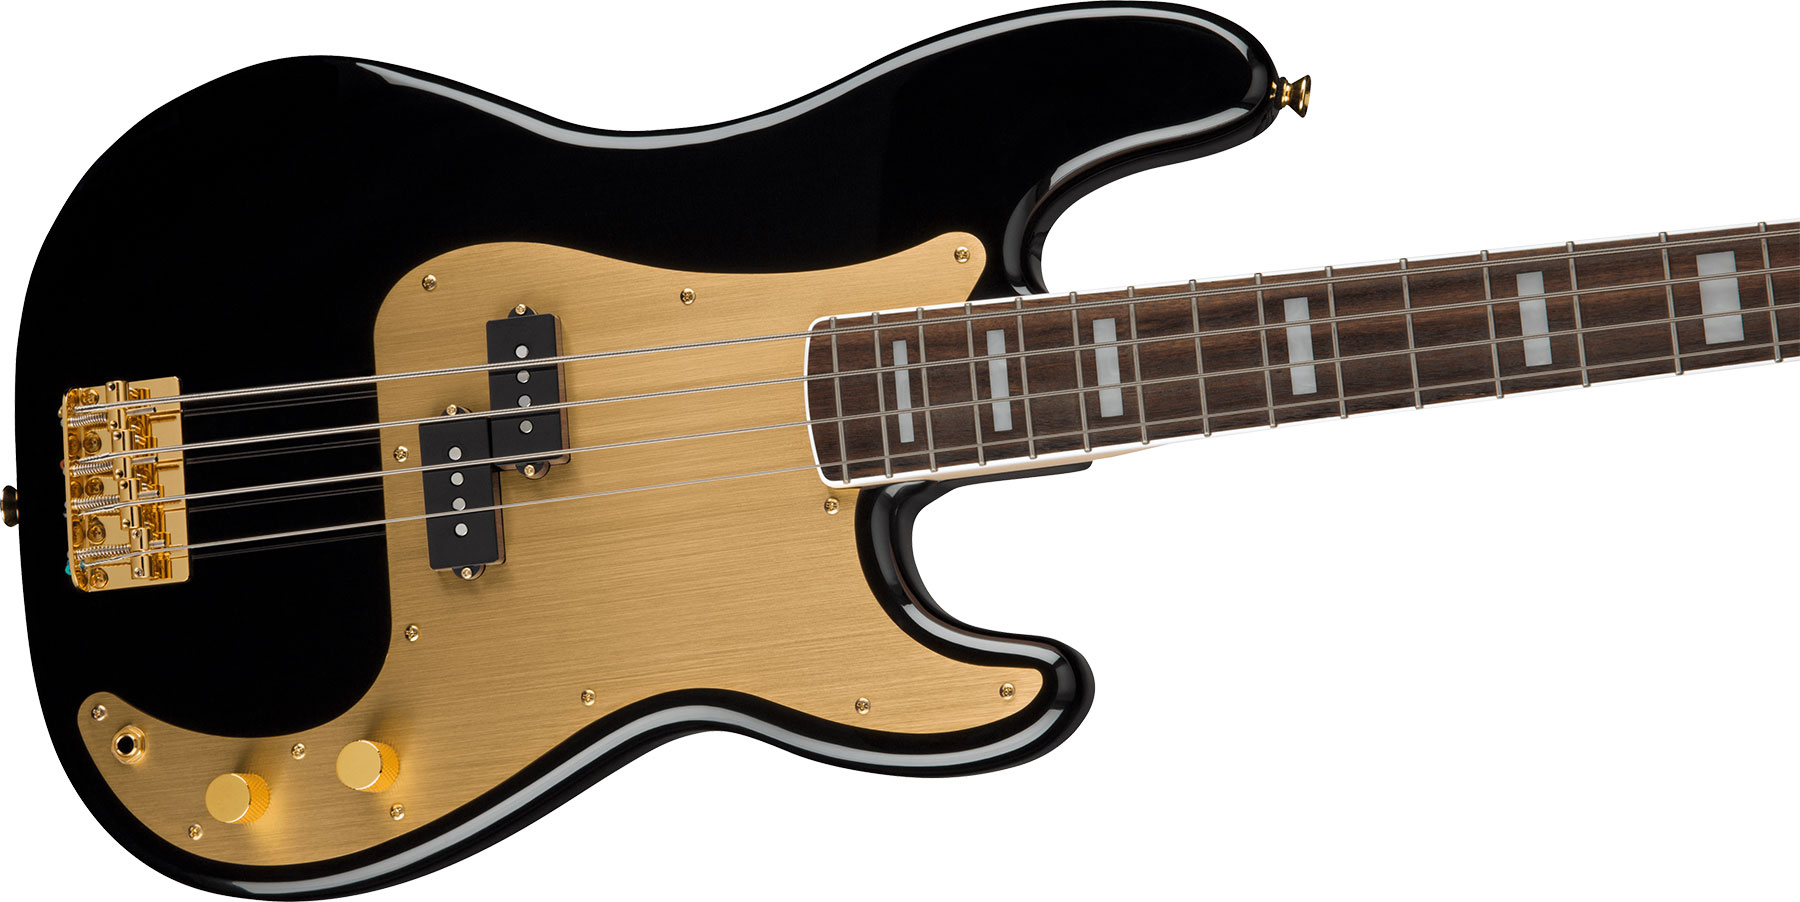 Squier Precision Bass 40th Anniversary Gold Edition Lau - Black - Solid body electric bass - Variation 2